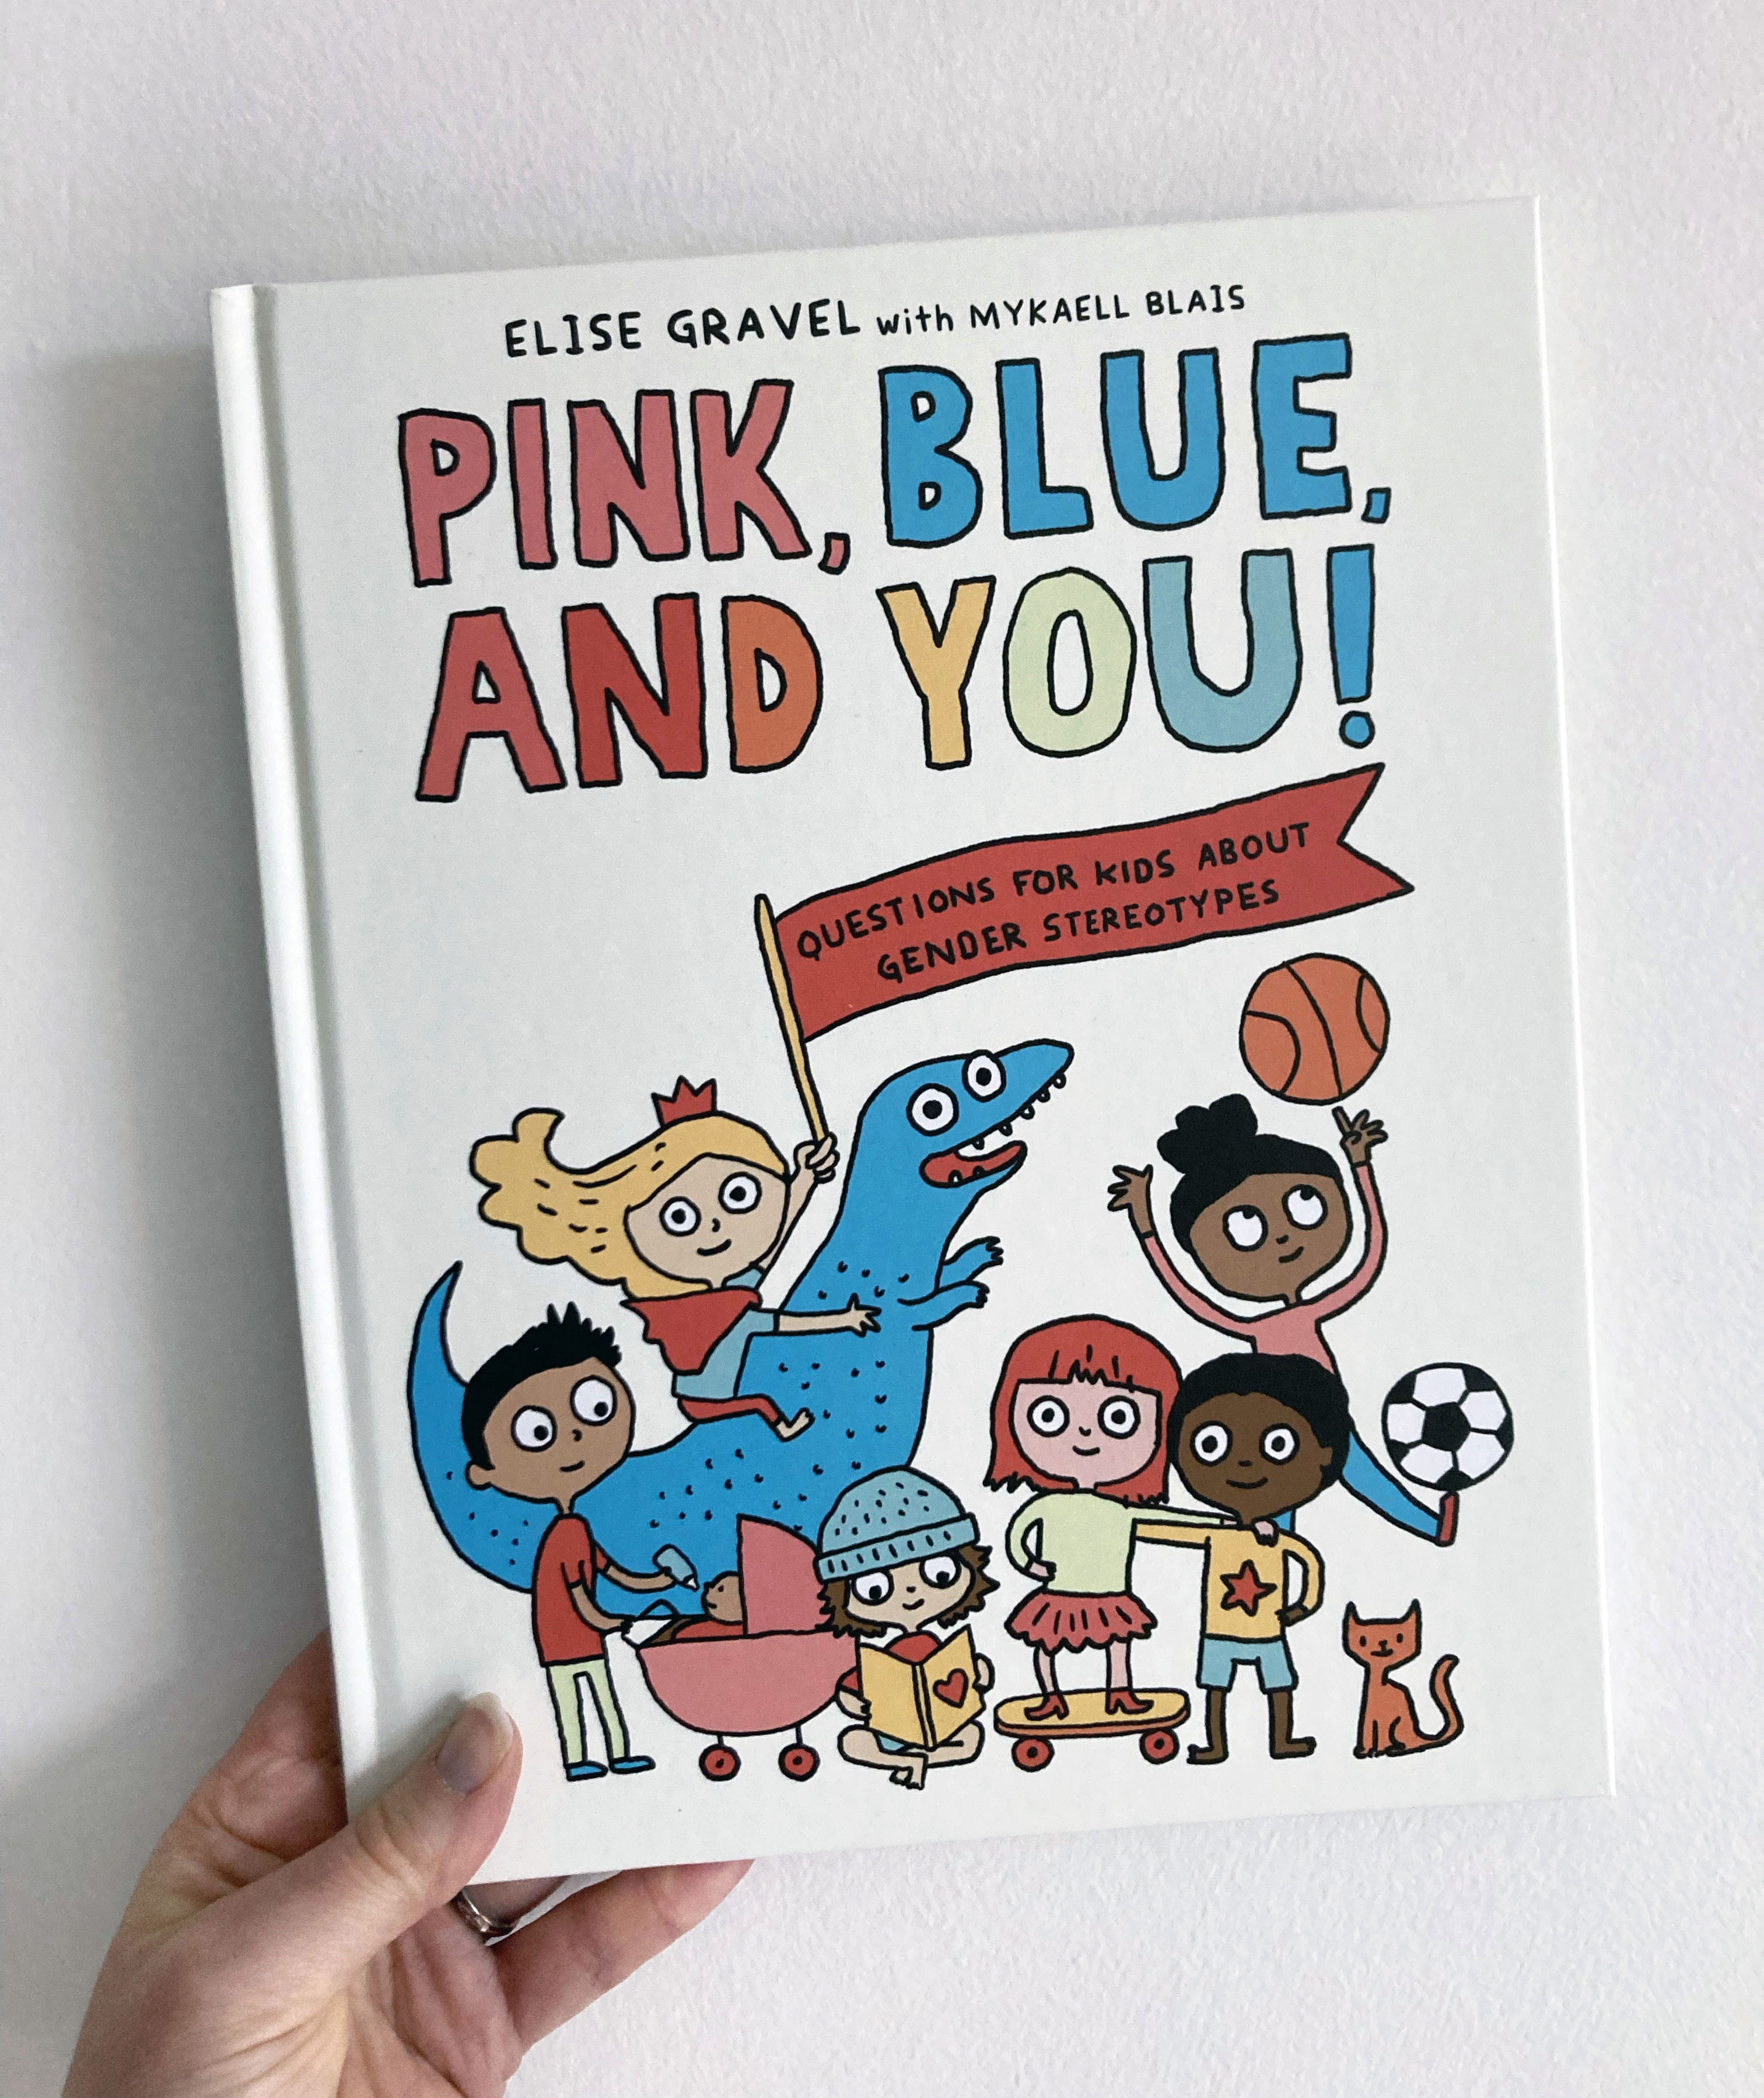 Pink, Blue and You: my new book is in stores today!